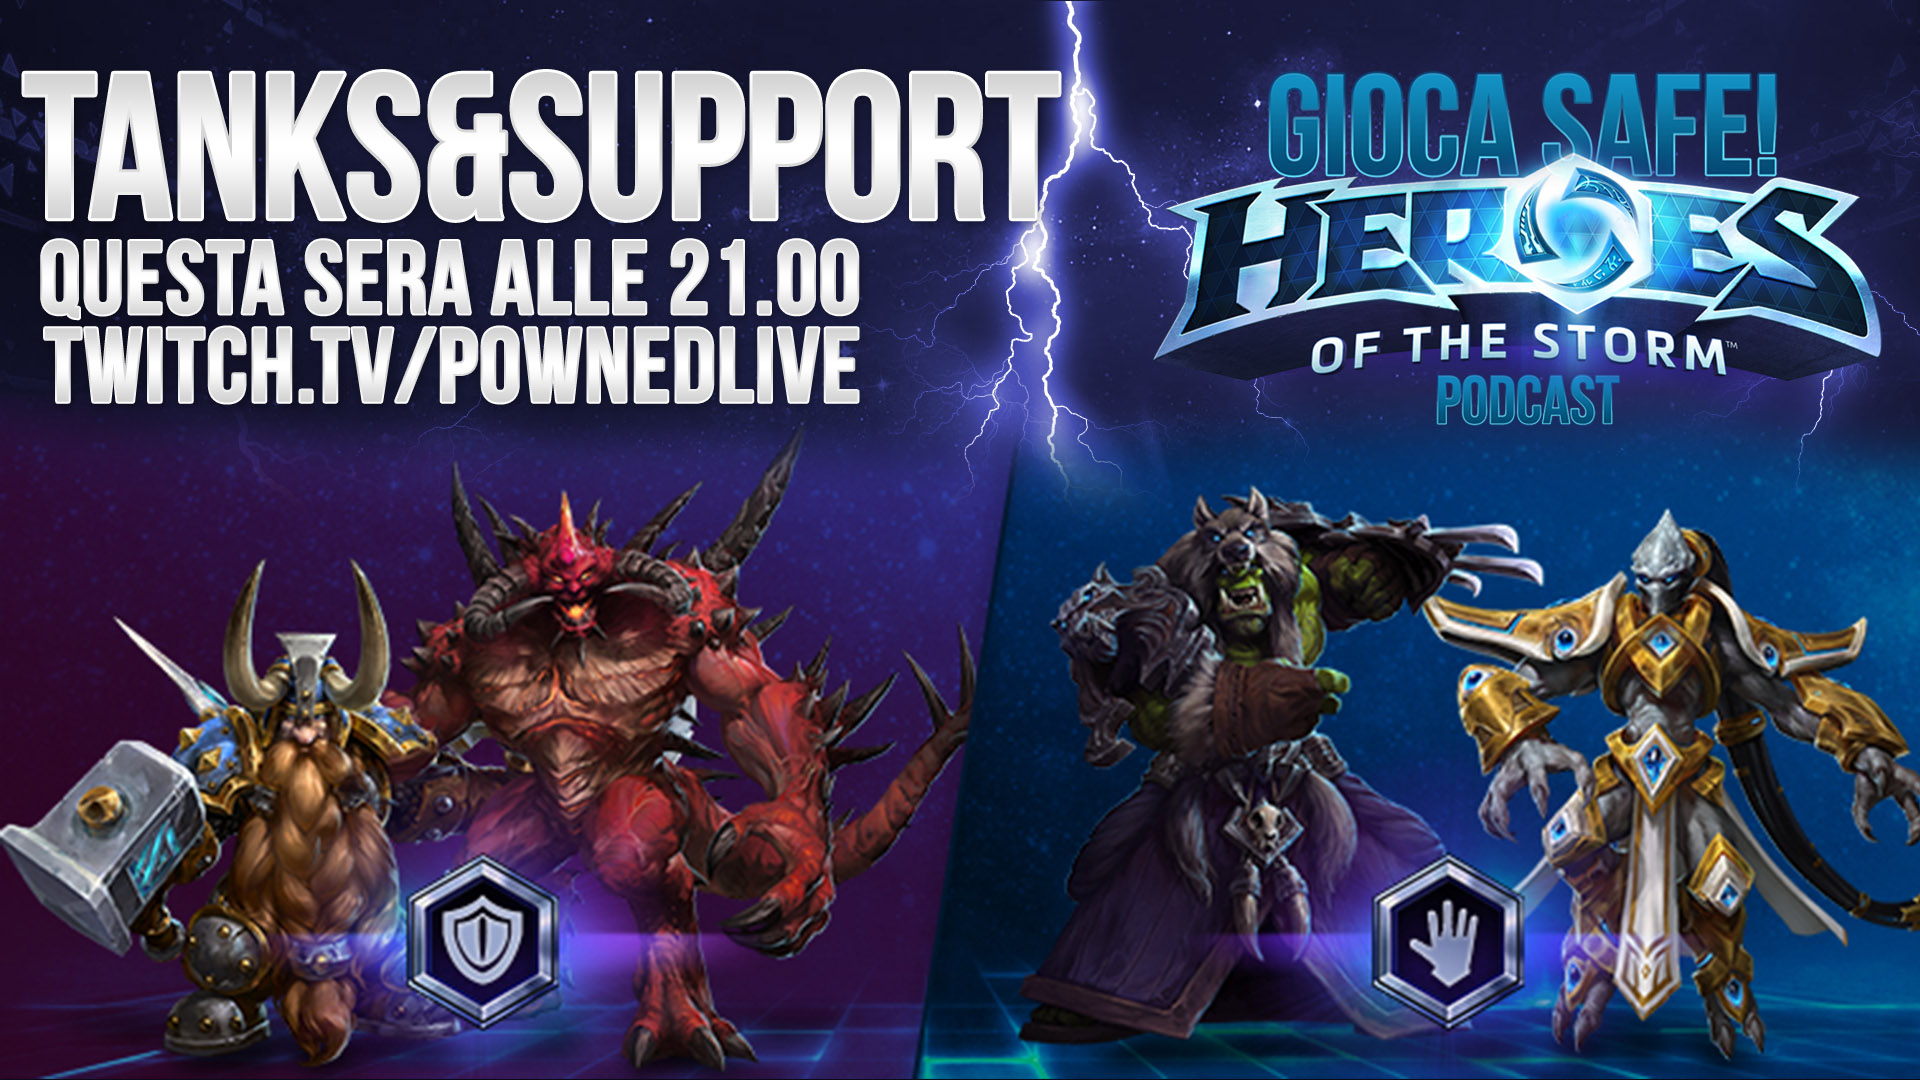 Gioca Safe! Heroes of the Storm podcast